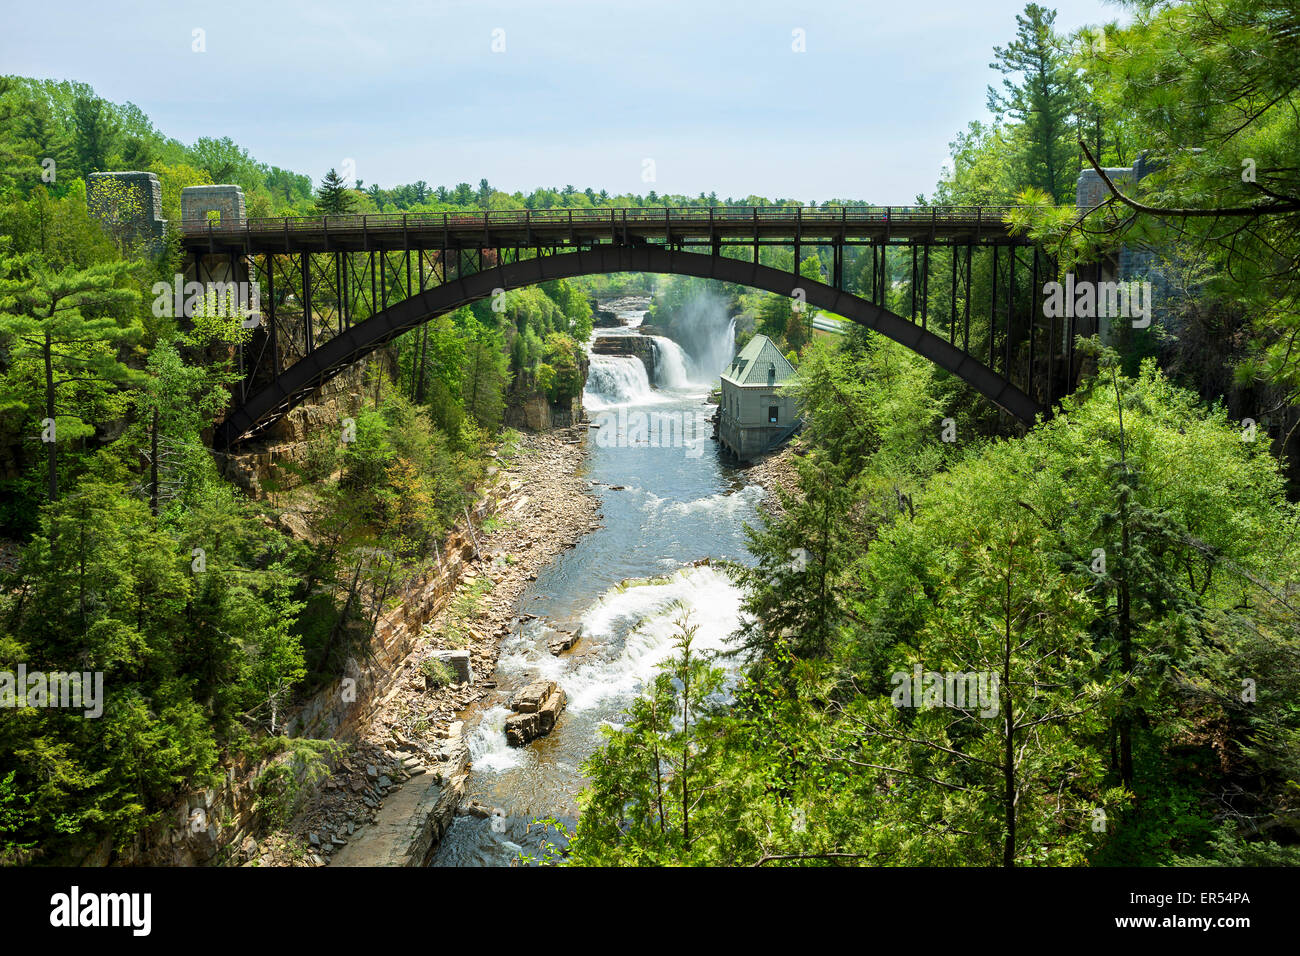 Scenic view of Rainbow Falls and of the Arch Bridge in Ausable Chasm, town of Keeseville in Upstate New York. Stock Photo